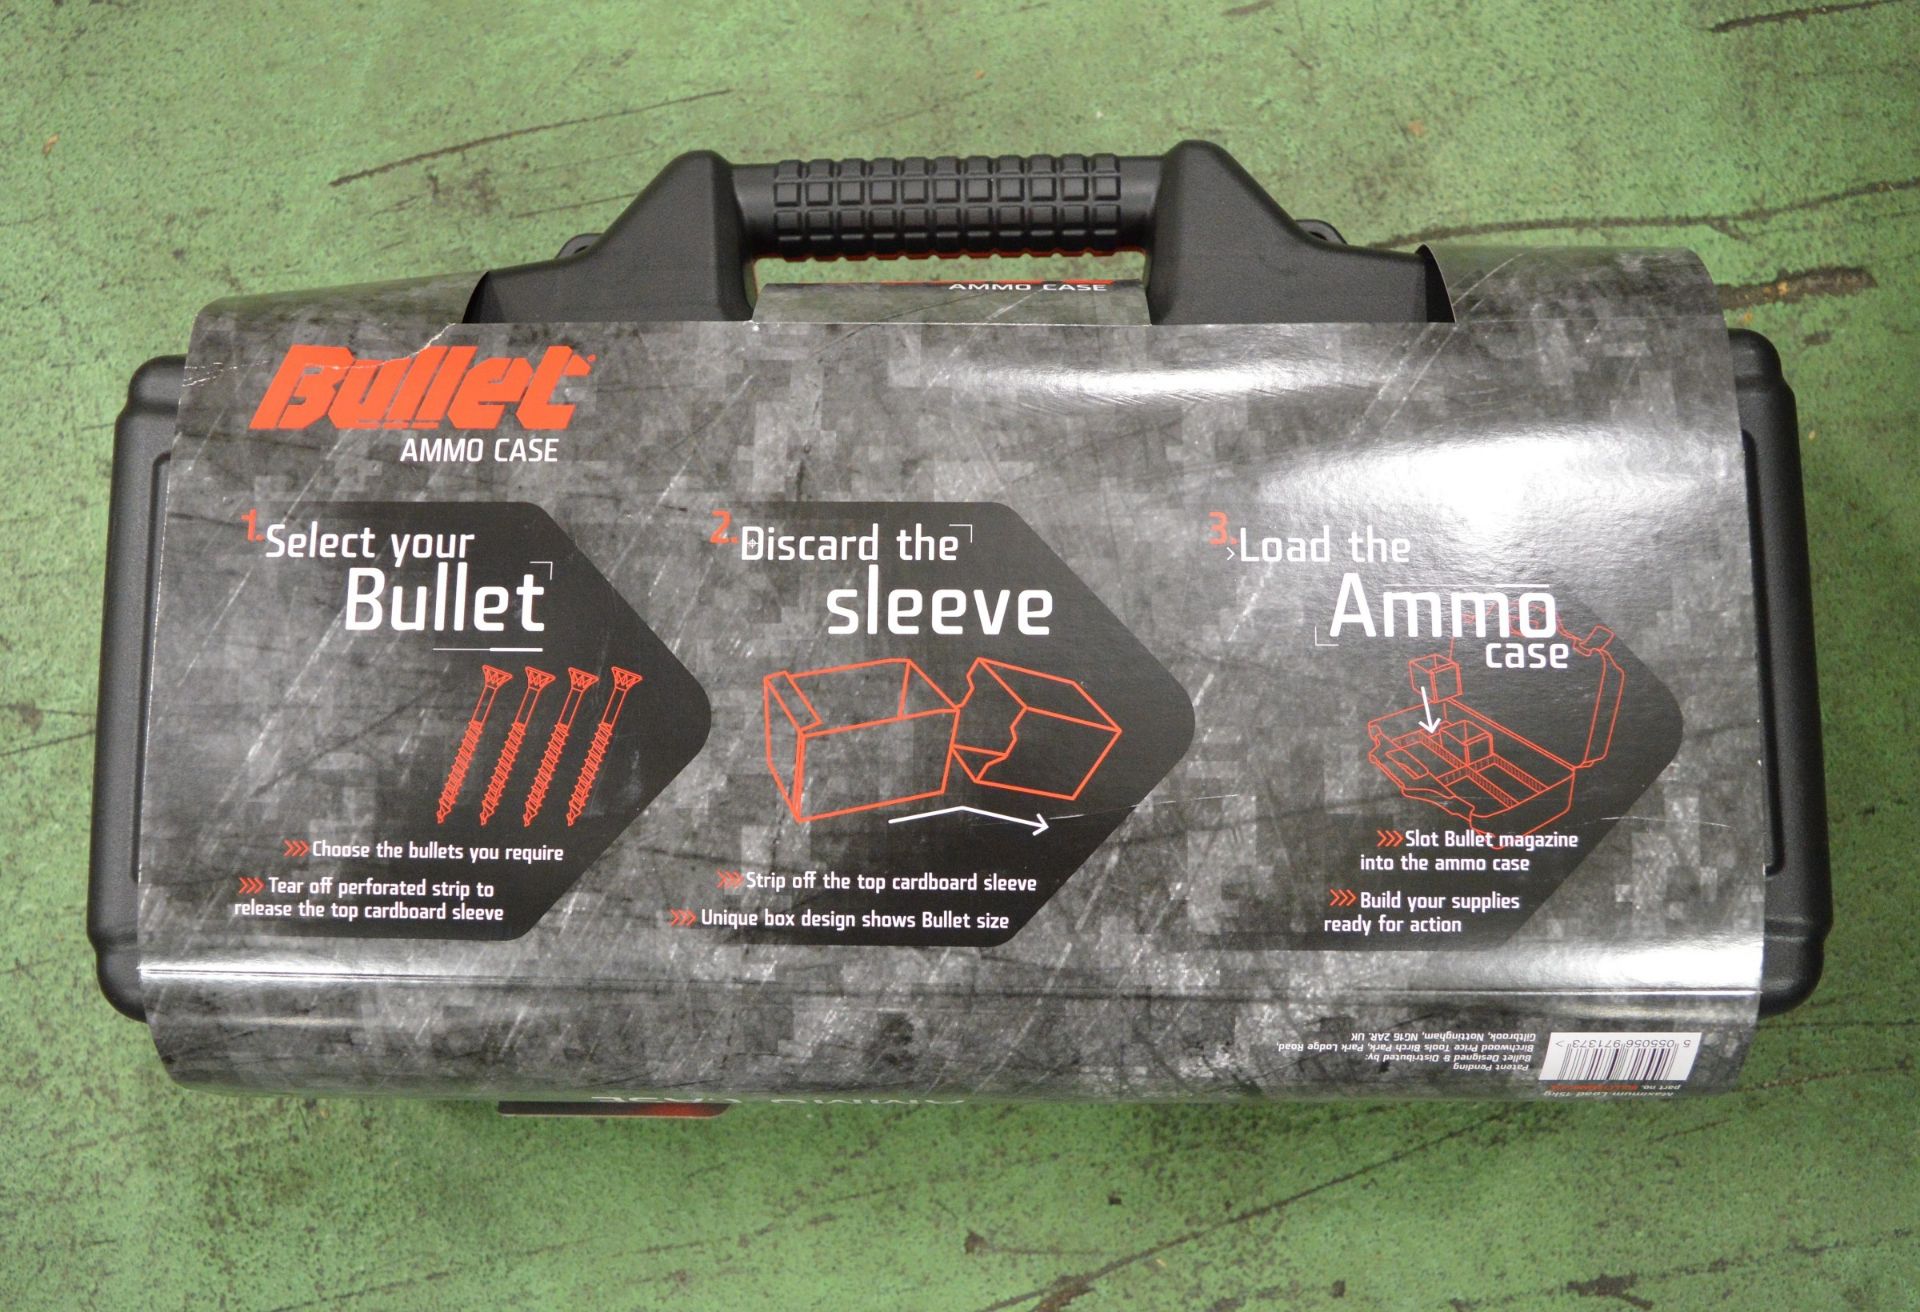 3x Bullet Ammo Cases tool boxes - Image 2 of 2